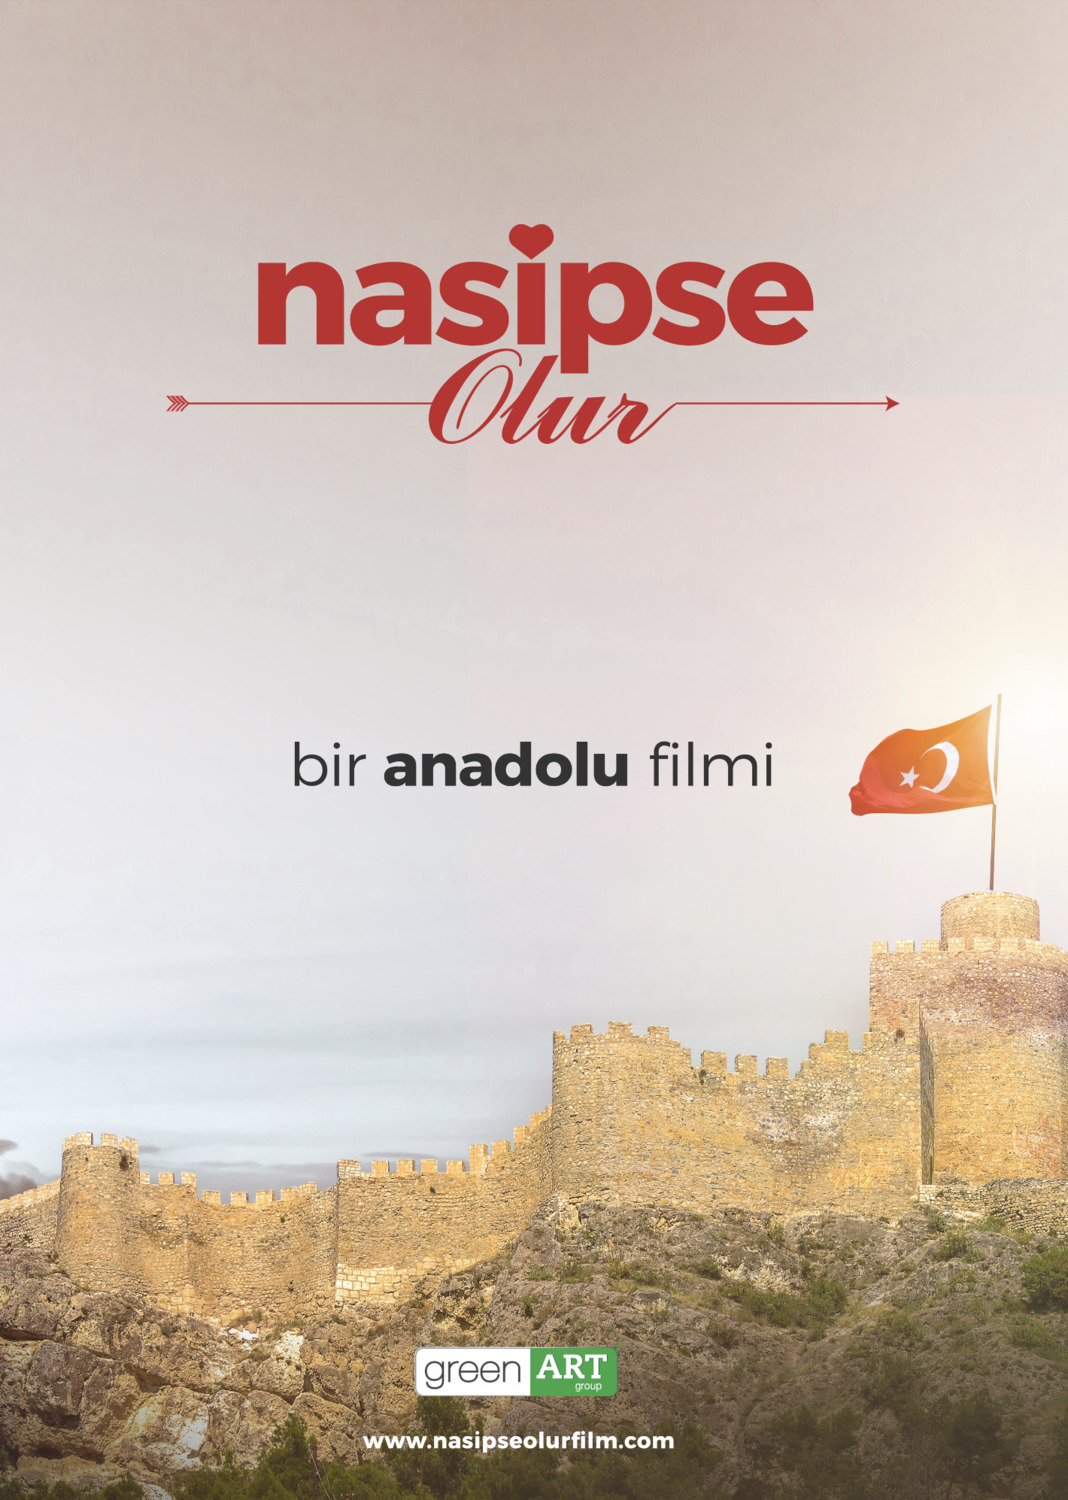 Extra Large Movie Poster Image for Nasipse Olur (#1 of 2)